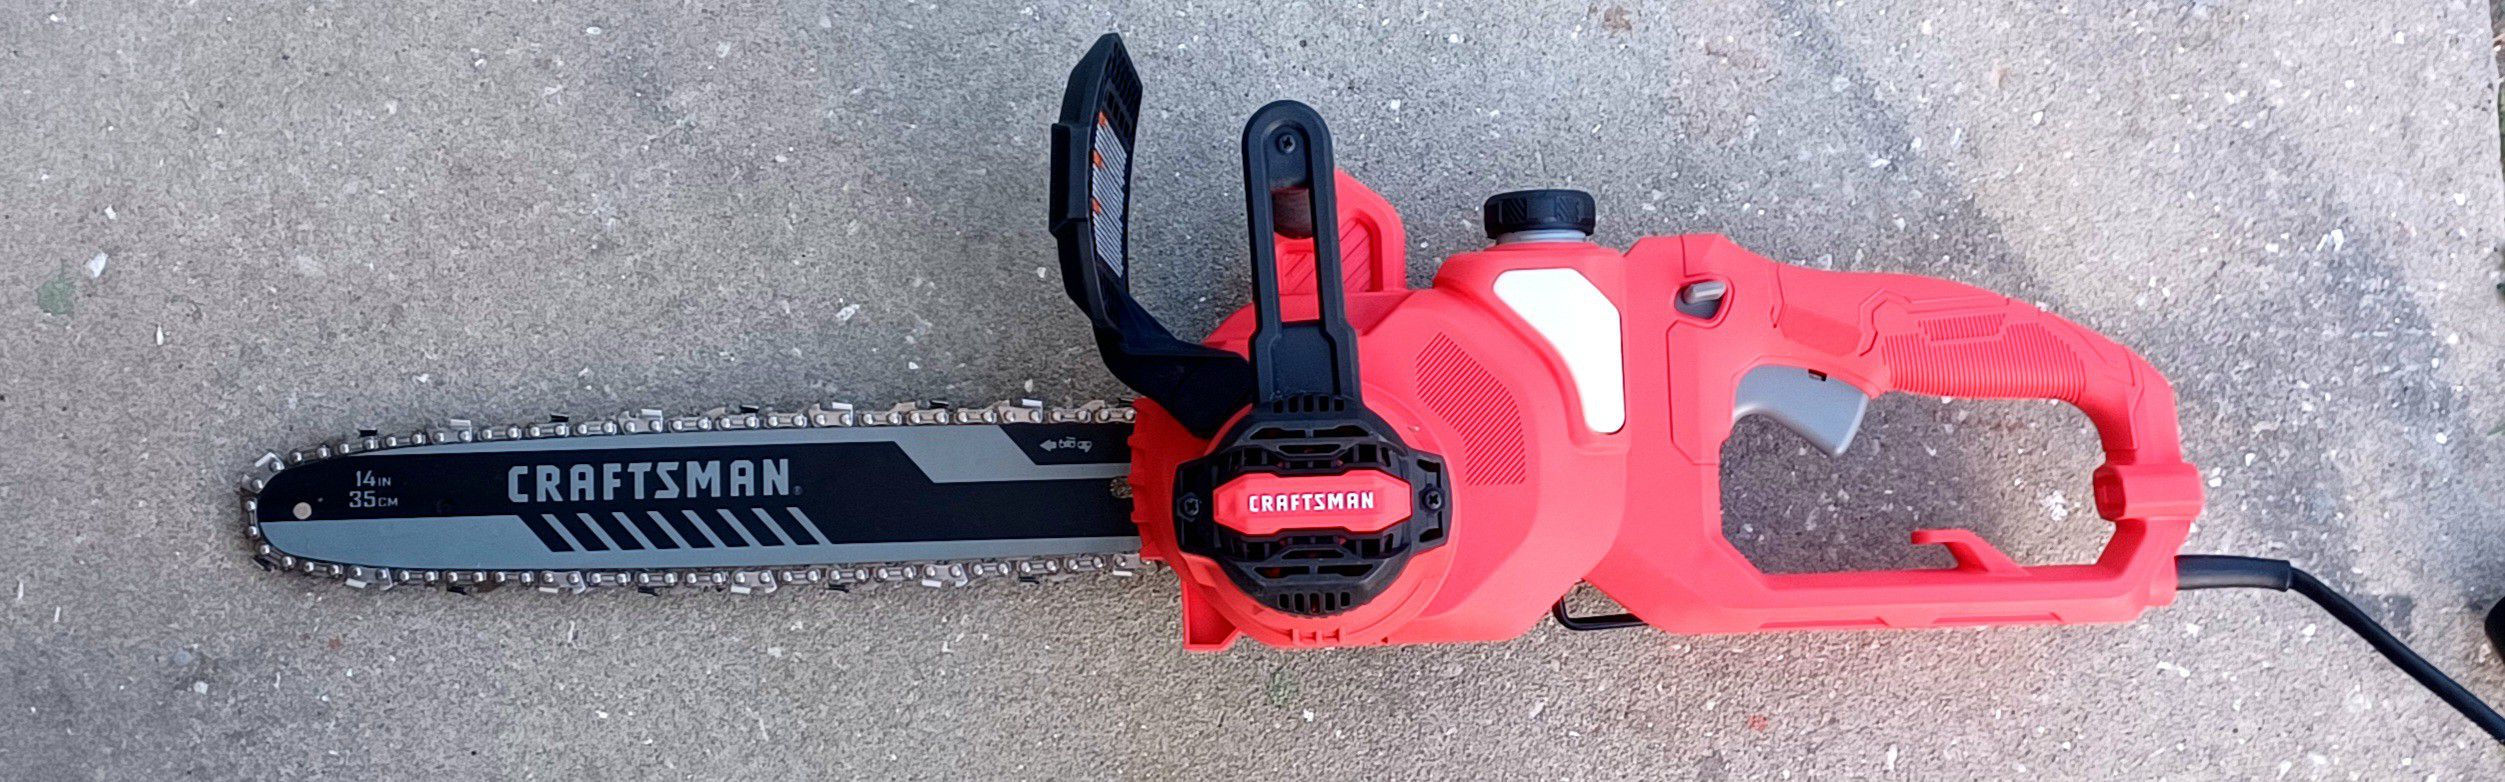 Chainsaw Craftsman Electric